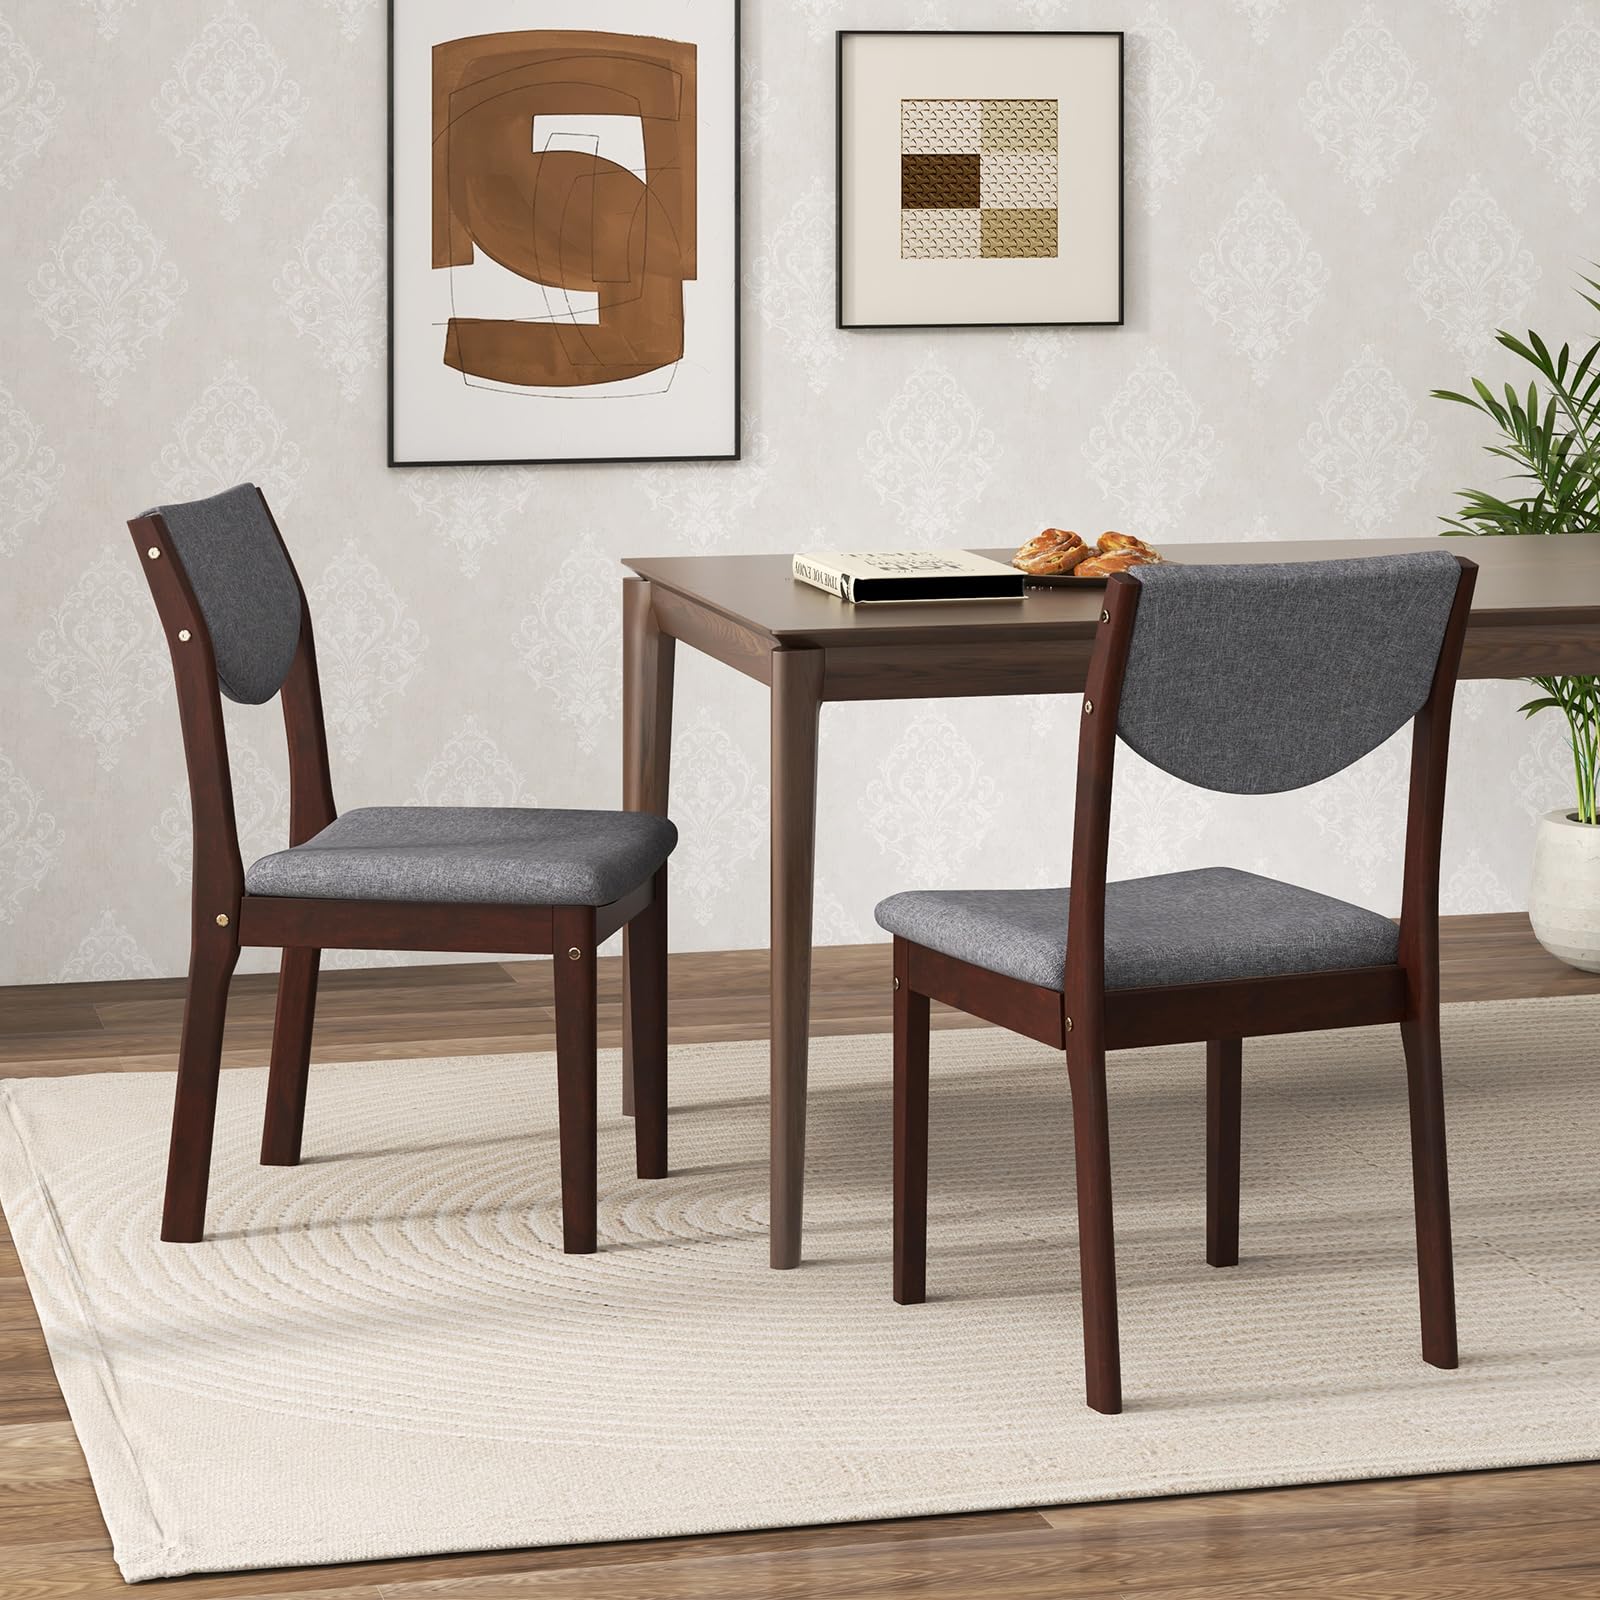 Giantex Wood Dining Chair, Wooden Kitchen Chairs with Rubber Wood Frame